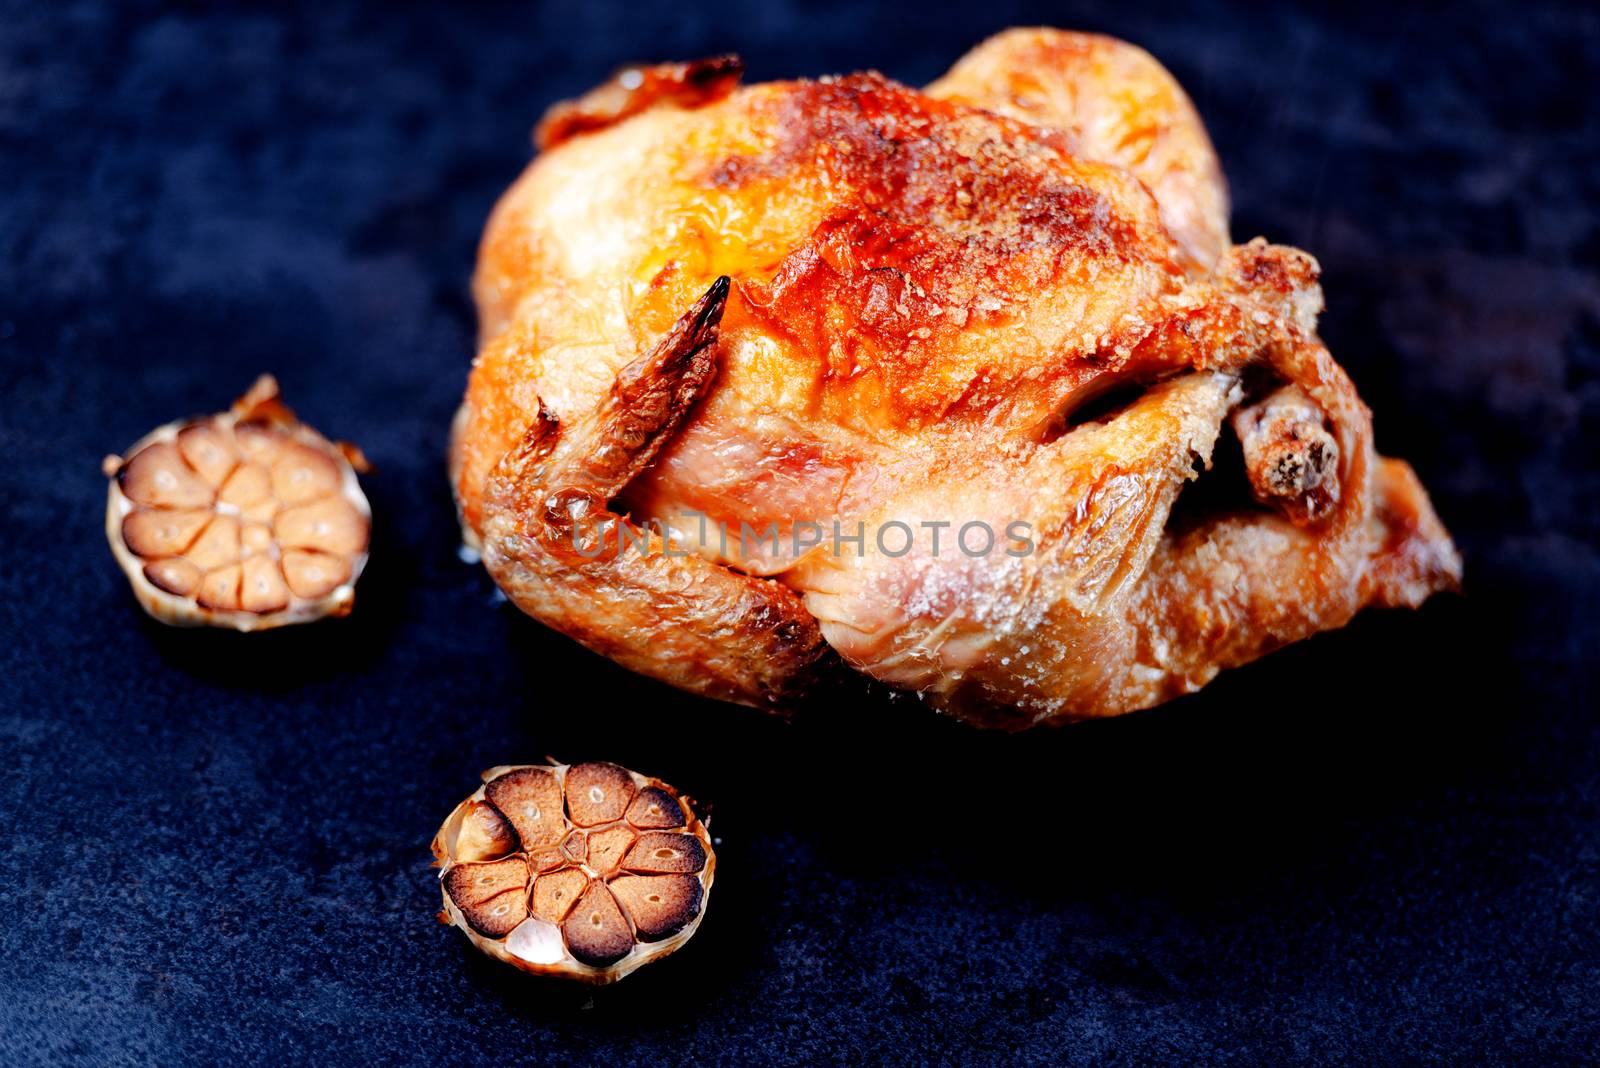 Whole oven roasted chicken with garlic by Nanisimova